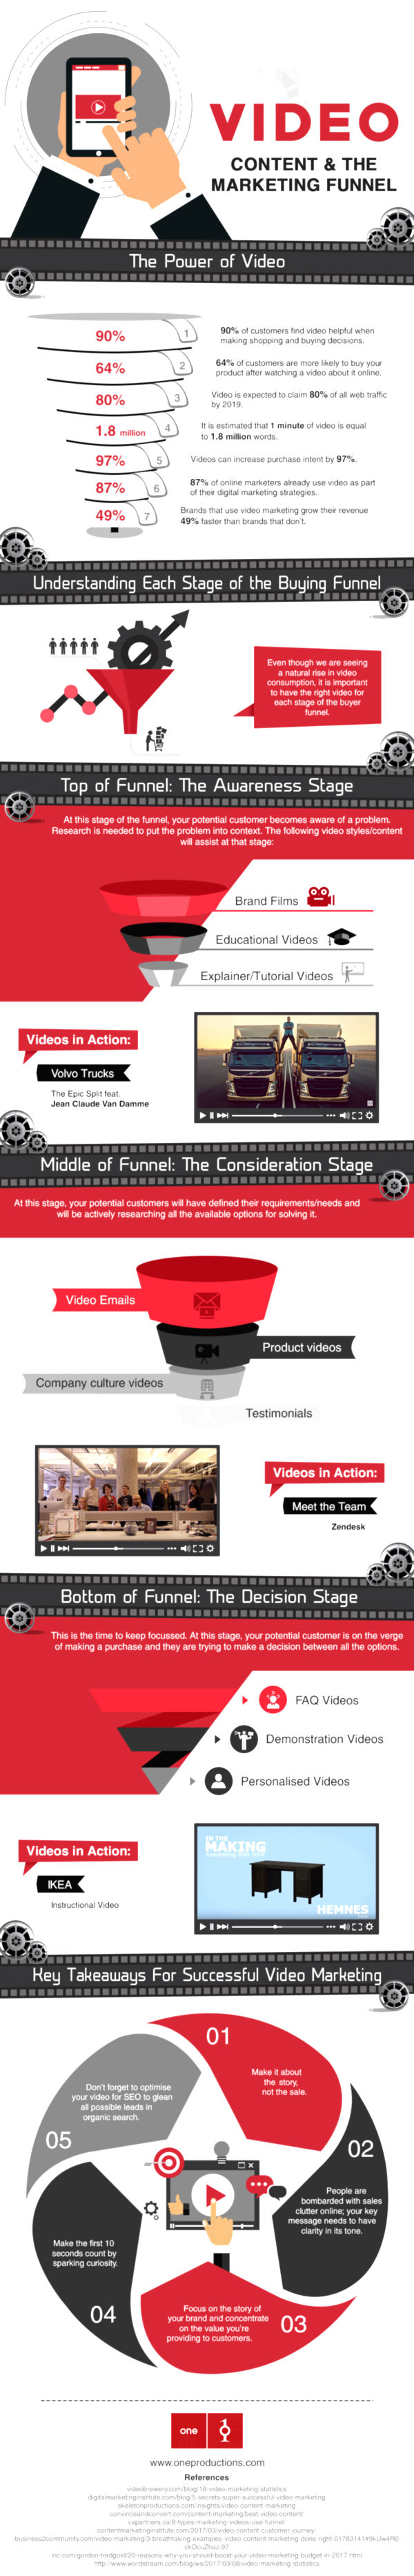 Video Content & Its Role in the Marketing Funnel 1